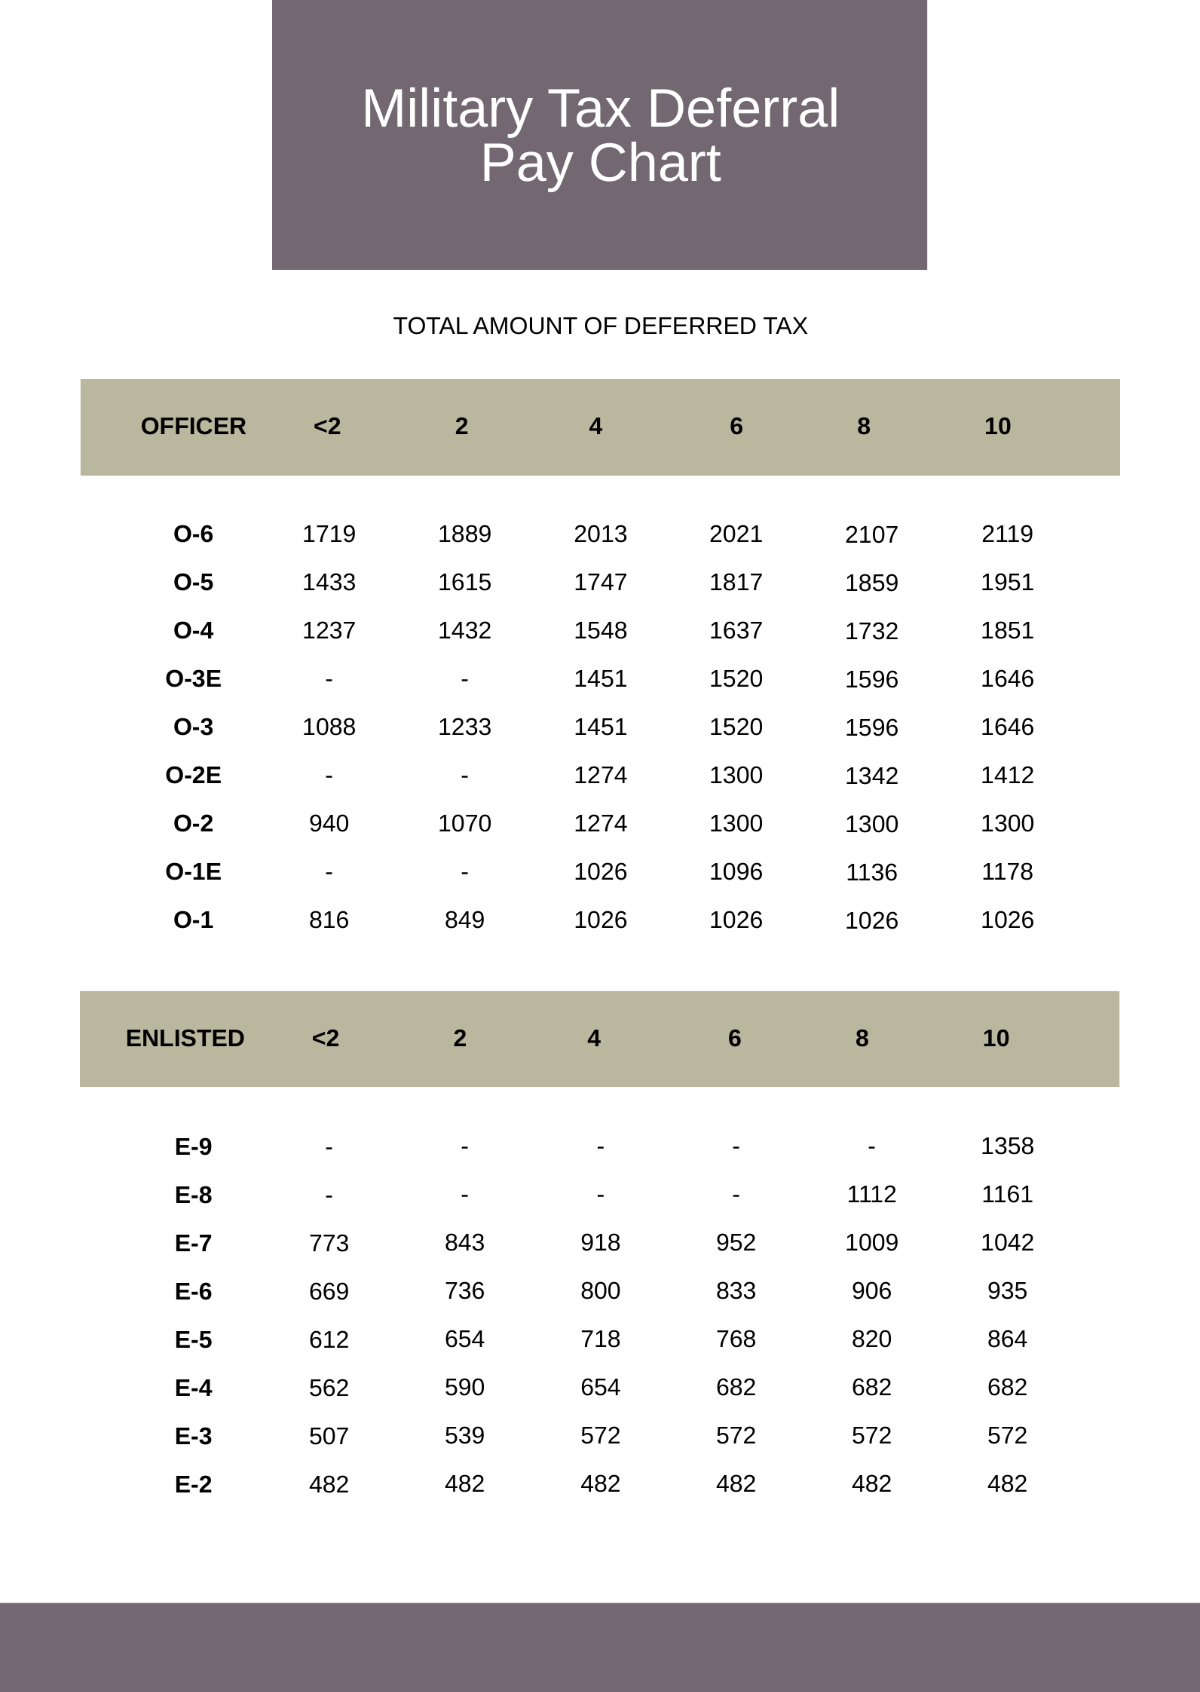 Military Tax Deferral Pay Chart Template